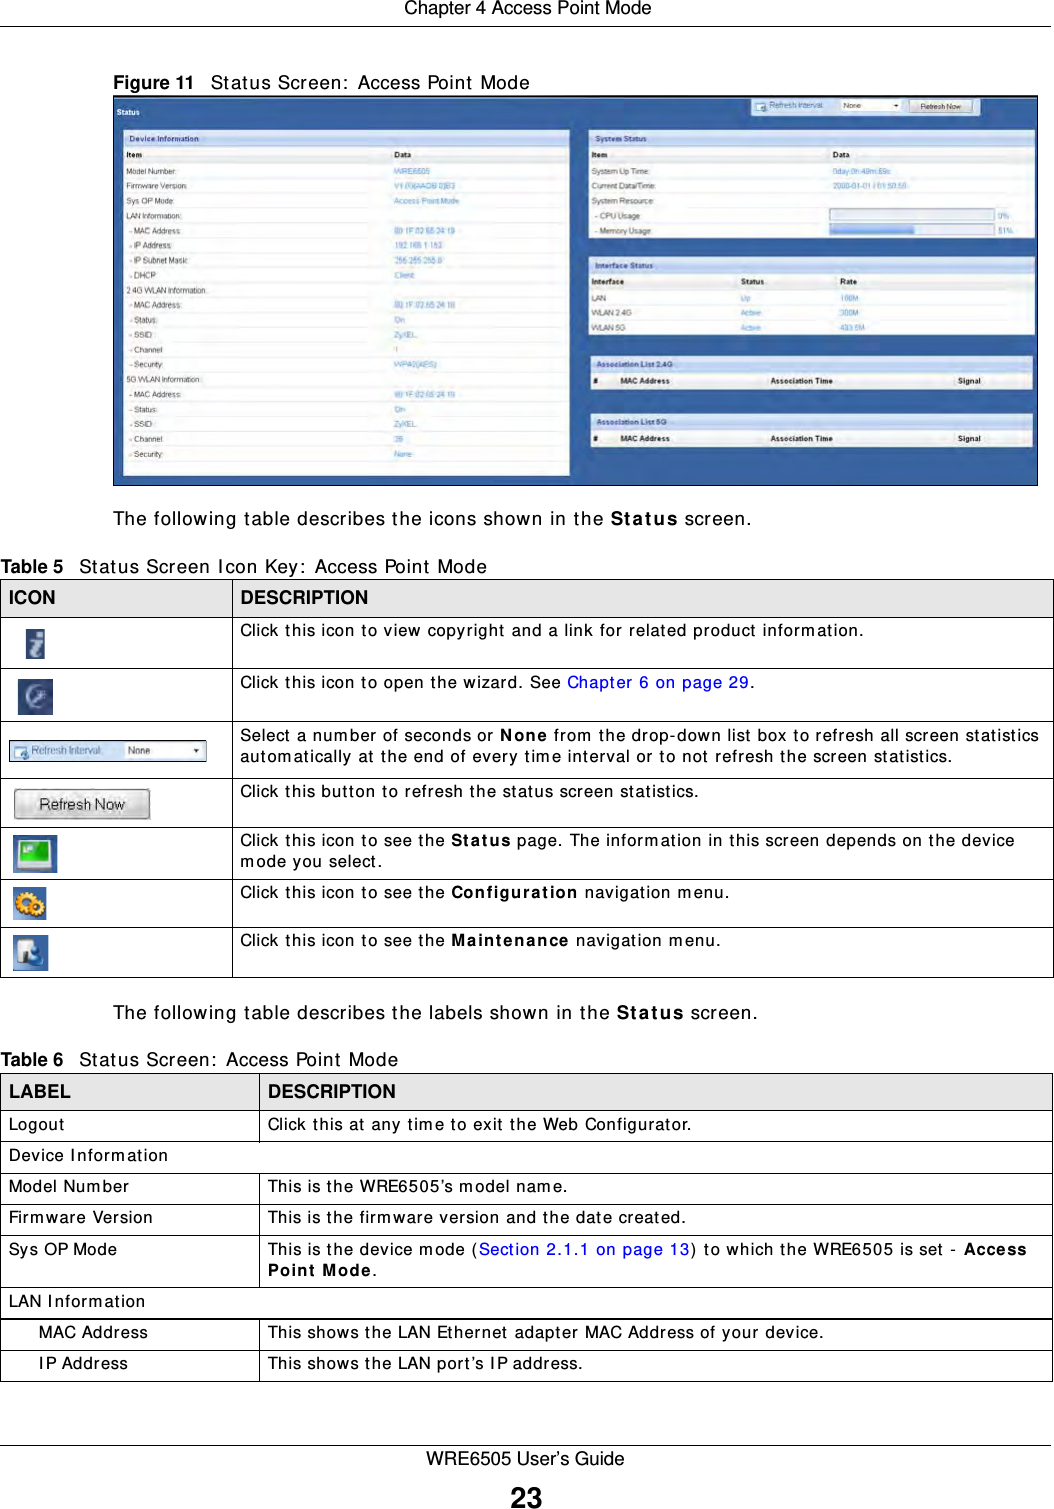  Chapter 4 Access Point ModeWRE6505 User’s Guide23Figure 11   Status Screen:  Access Point Mode The following table describes the icons shown in the St a t u s screen.The following table describes the labels shown in the St a t us screen.Table 5   Status Screen Icon Key:  Access Point ModeICON DESCRIPTIONClick this icon to view copyright and a link for related product  inform ation.Click t his icon to open the wizard. See Chapter 6 on page 29.Select a number of seconds or N o ne  from the drop-down list box to refresh all screen statistics autom atically at the end of every tim e interval or to not refresh the screen st atistics.Click this button to refresh the status screen statistics.Click t his icon to see the St a t us page. The inform ation in this screen depends on the device m ode you select.Click t his icon to see the Con fi gu ra t ion  navigation m enu.Click t his icon to see the Ma int ena nce navigation menu.Table 6   Status Screen:  Access Point ModeLABEL DESCRIPTIONLogout Click this at any time to exit the Web Configurator.Device I nformationModel Num ber This is the WRE6505’s model name.Firm ware Version This is the firm ware version and the date created. Sys OP Mode This is the device m ode (Section 2.1.1 on page 13) to which the WRE6505 is set - Acce ss Point  M ode .LAN I nform ationMAC Address This shows the LAN Ethernet adapter MAC Address of your device.I P Address This shows the LAN port’s I P address.